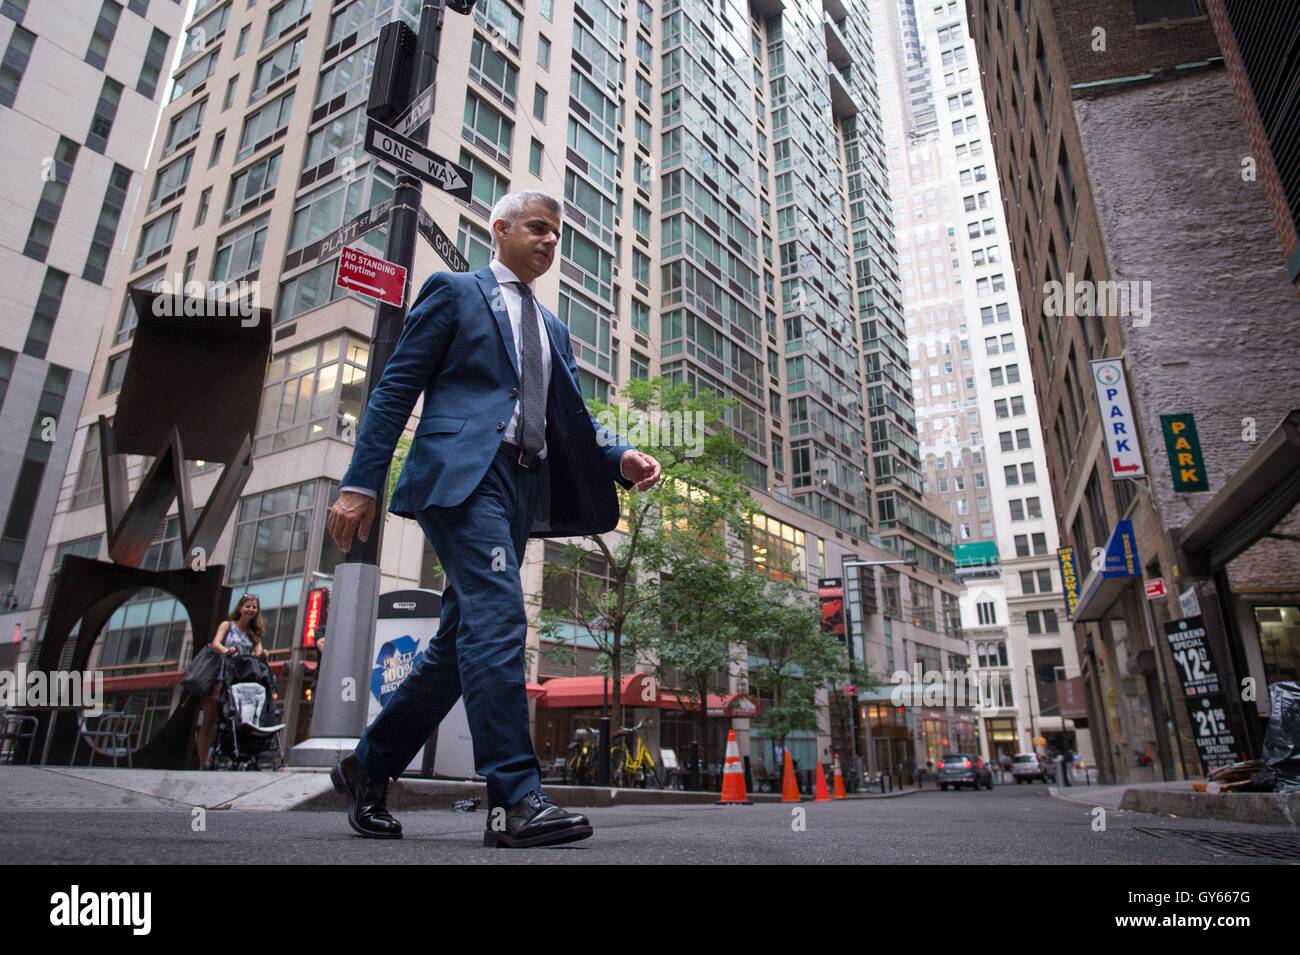 Mayor of London Sadiq Khan walks to his hotel in the Wall Street area of New York City during a three day visit to the US capital as part of his visit to North America, where he is due to attend a New York Mets baseball game and meet NYC Mayor Bill de Blasio. Stock Photo